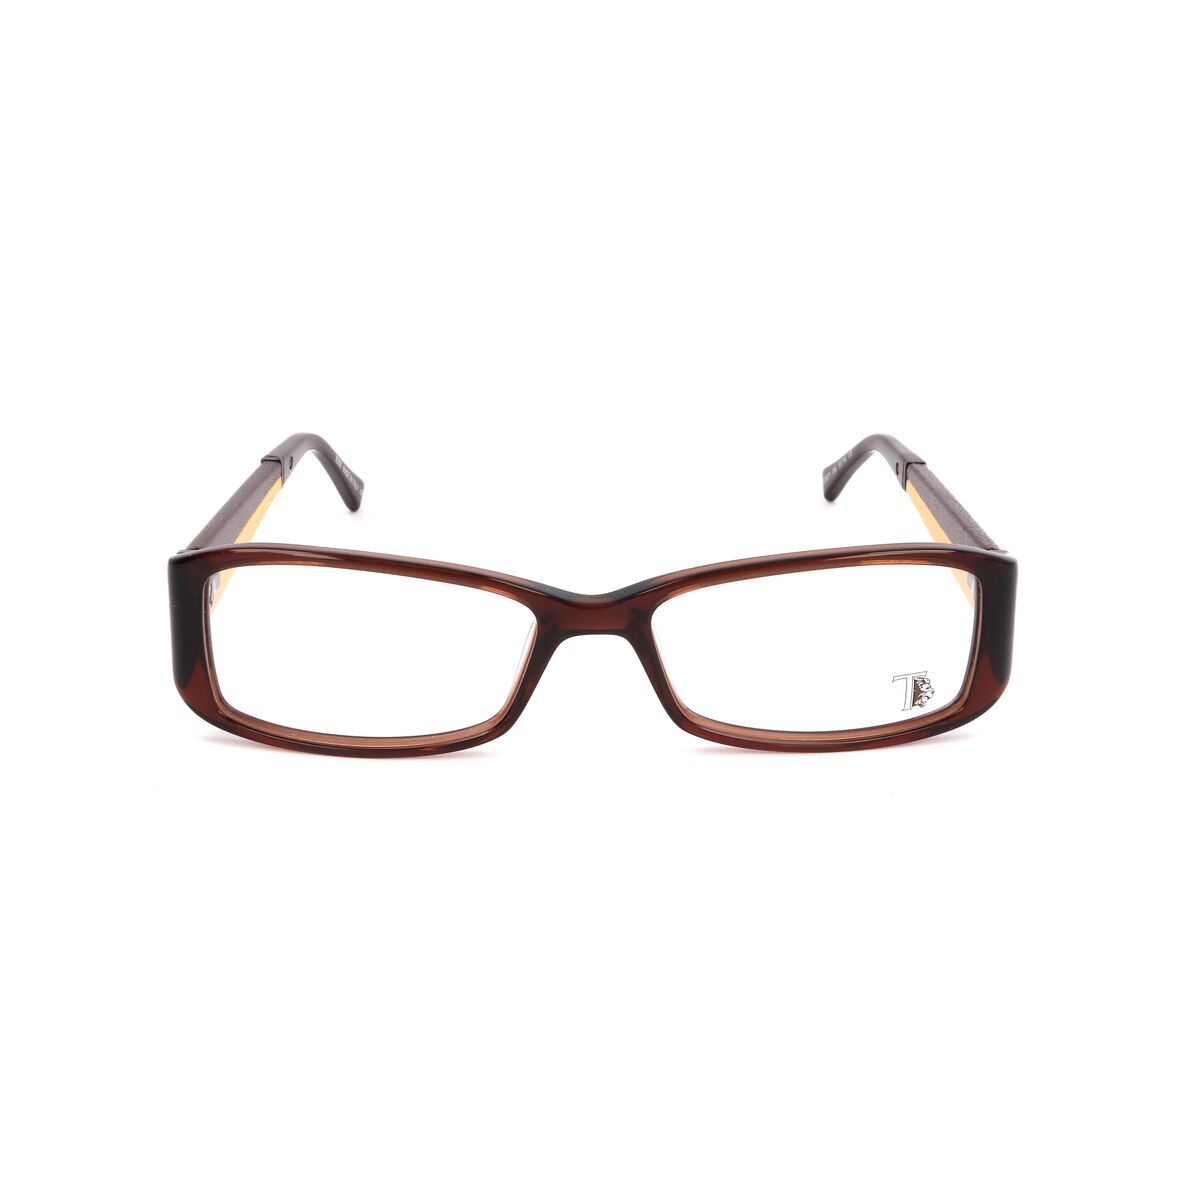 Ladies'Spectacle frame Tods TO5011-056 Havana